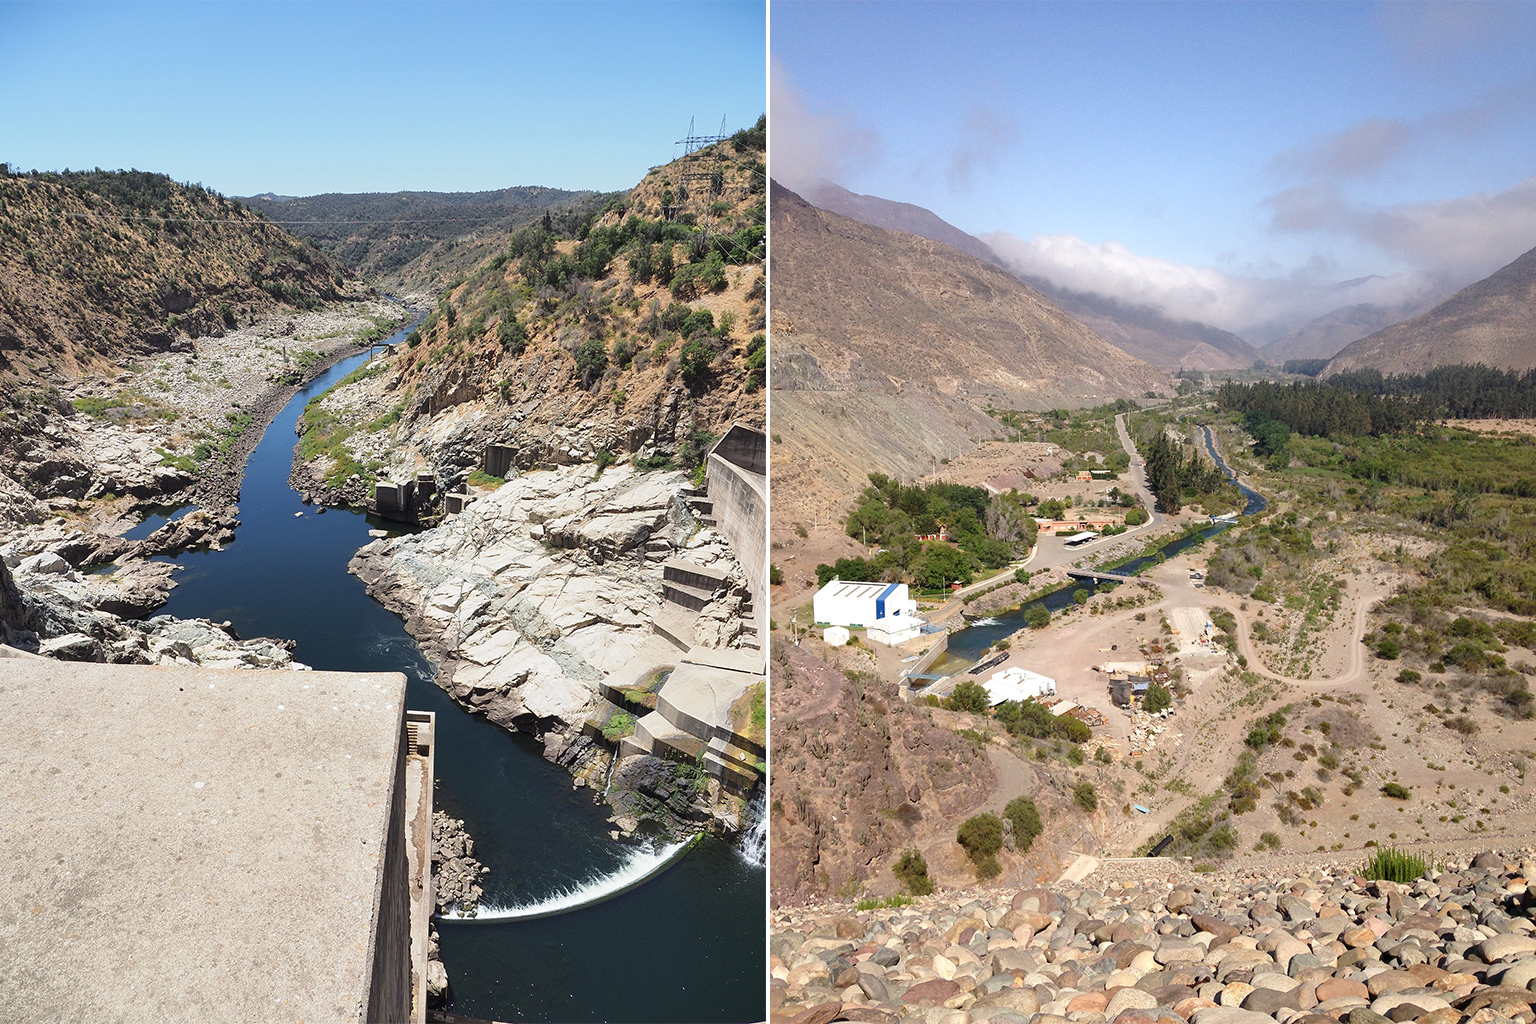 Reduced flow of water at two different dams in Chile.